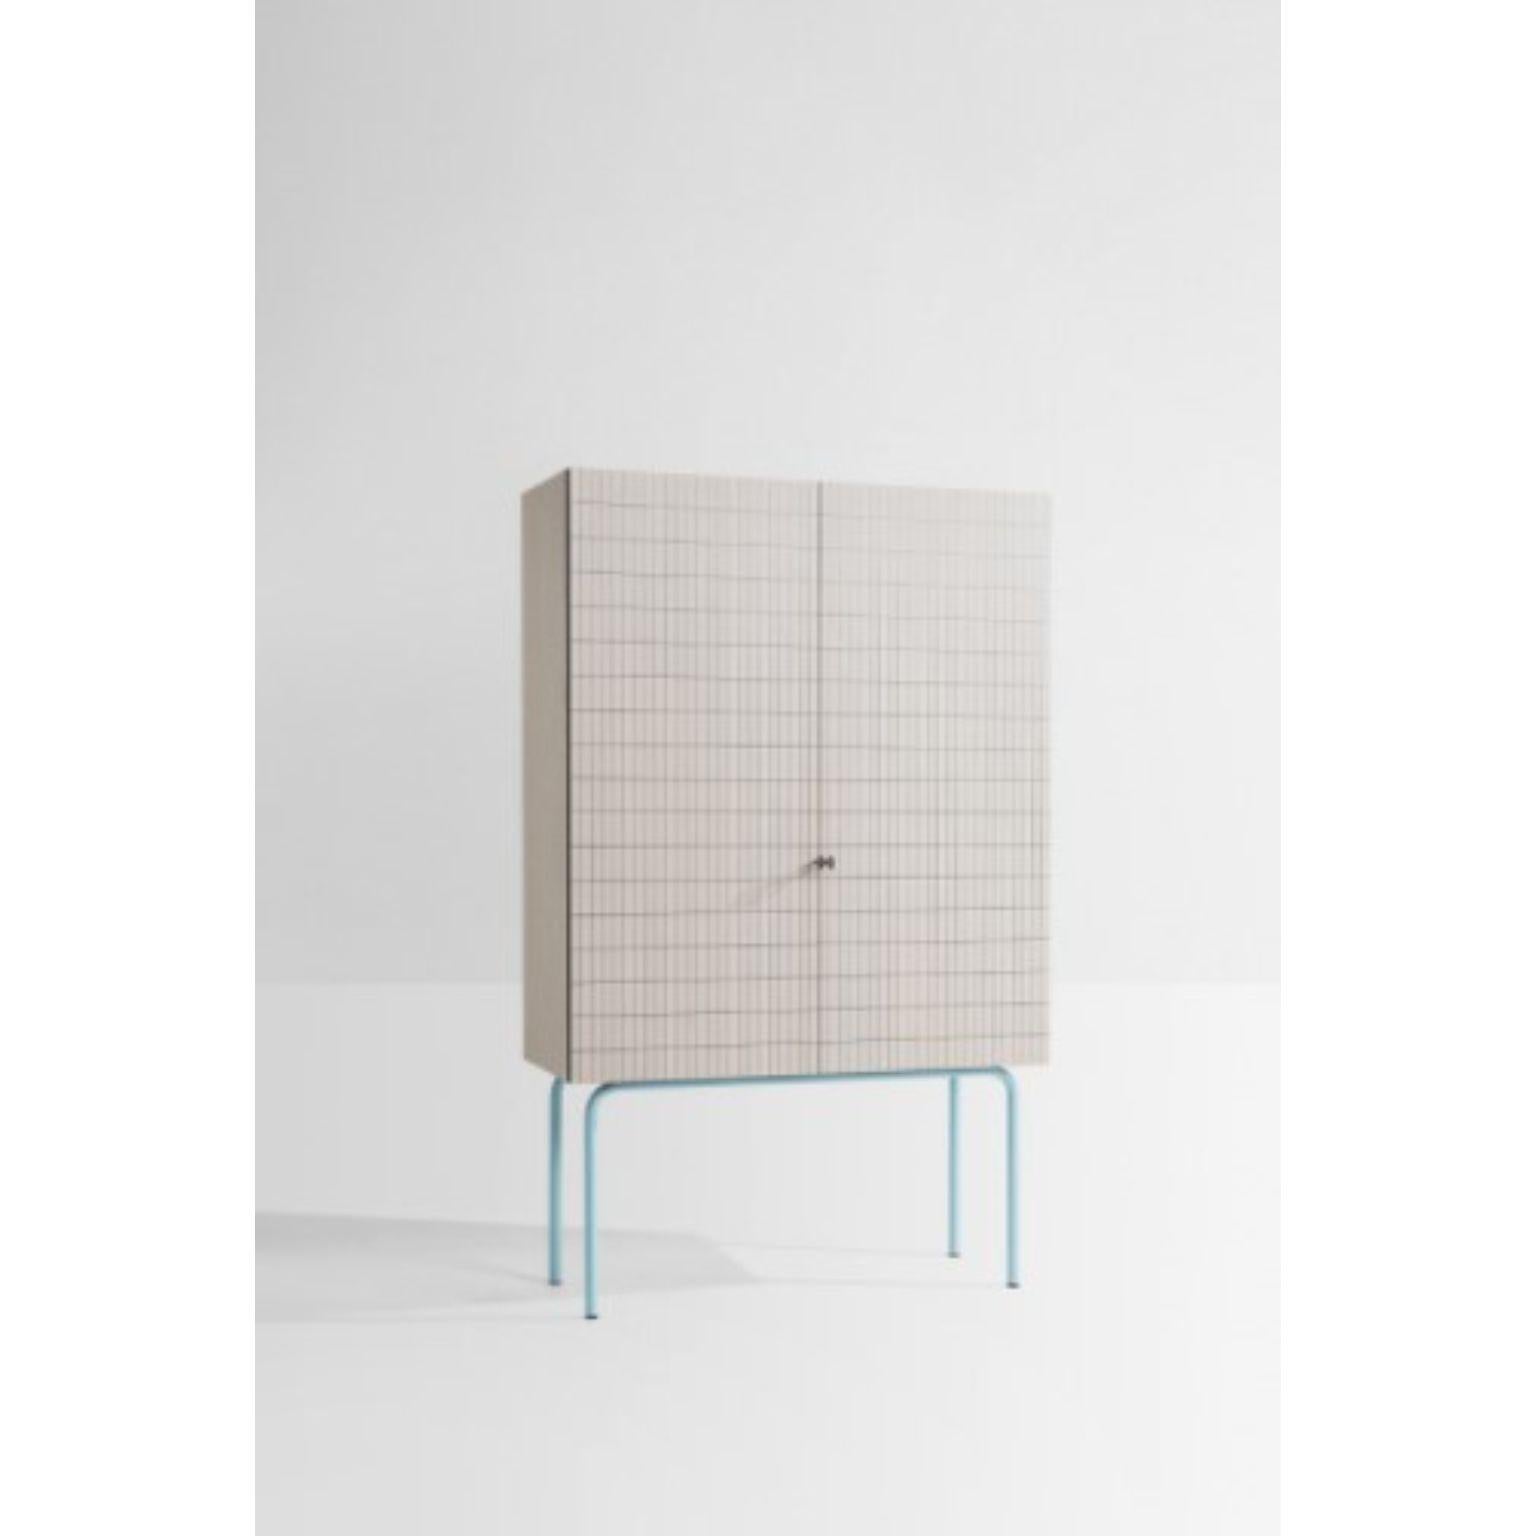 Check cabinet by SEM
Dimensions: W120 x D48 x H195 cm
Material: Panels in black Valchromat, Shelves in Alpi, Sand oak wooden surface, Internal mirror panel and Legs in metallic structure matt varnished available in light blue, pink and brick.